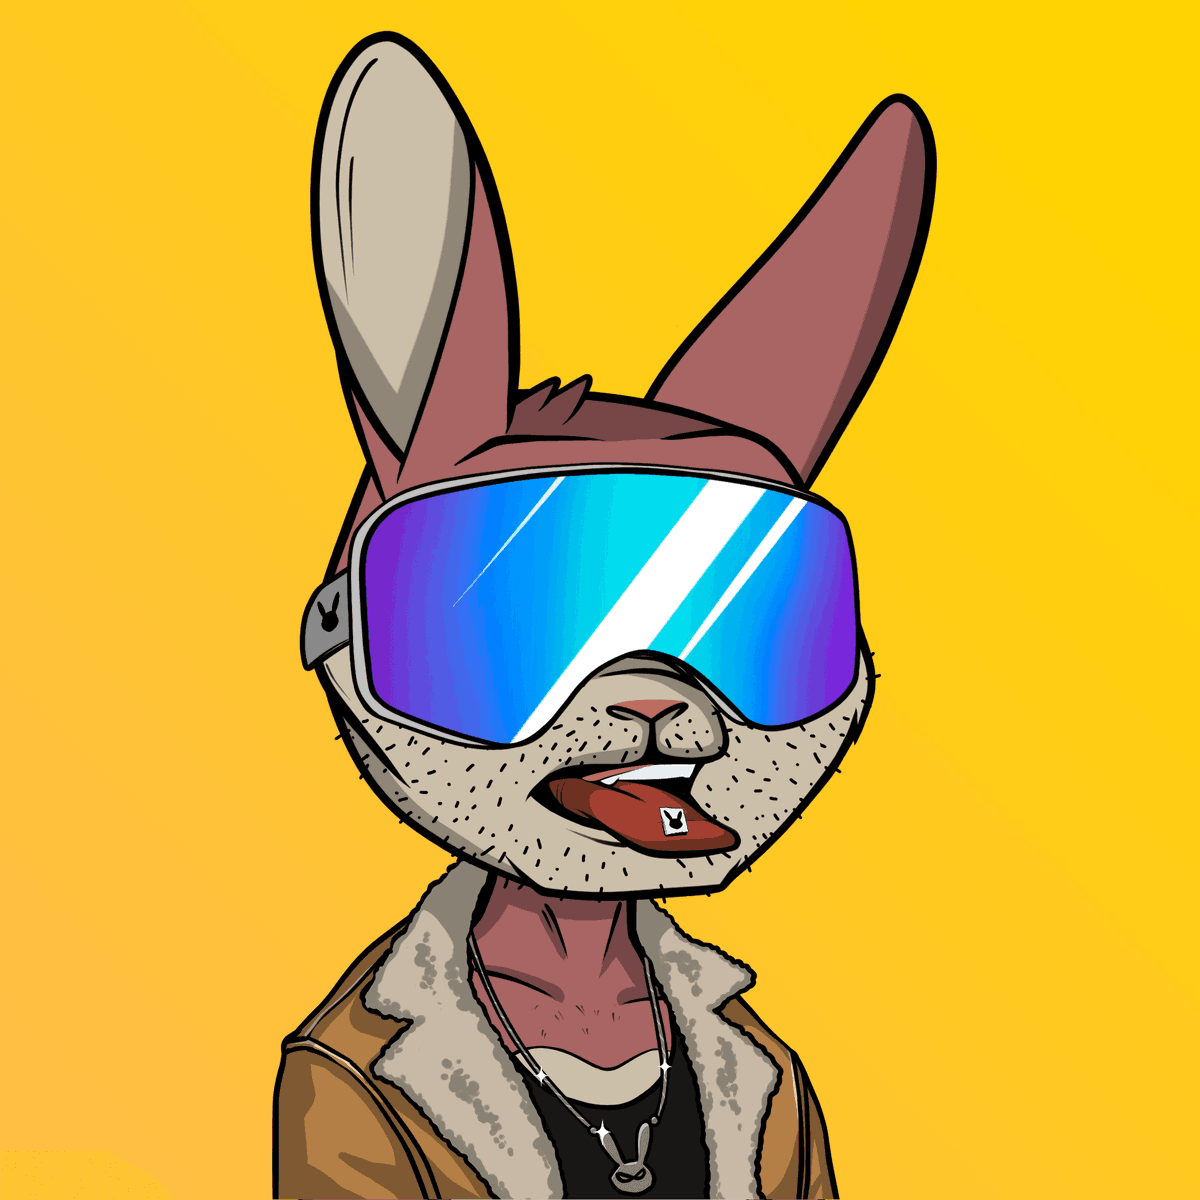 My pfp will always be a #MRRC i fucking love the art! Even i own a #MAYC #BAYC its #yearoftherabbit!! LFG!